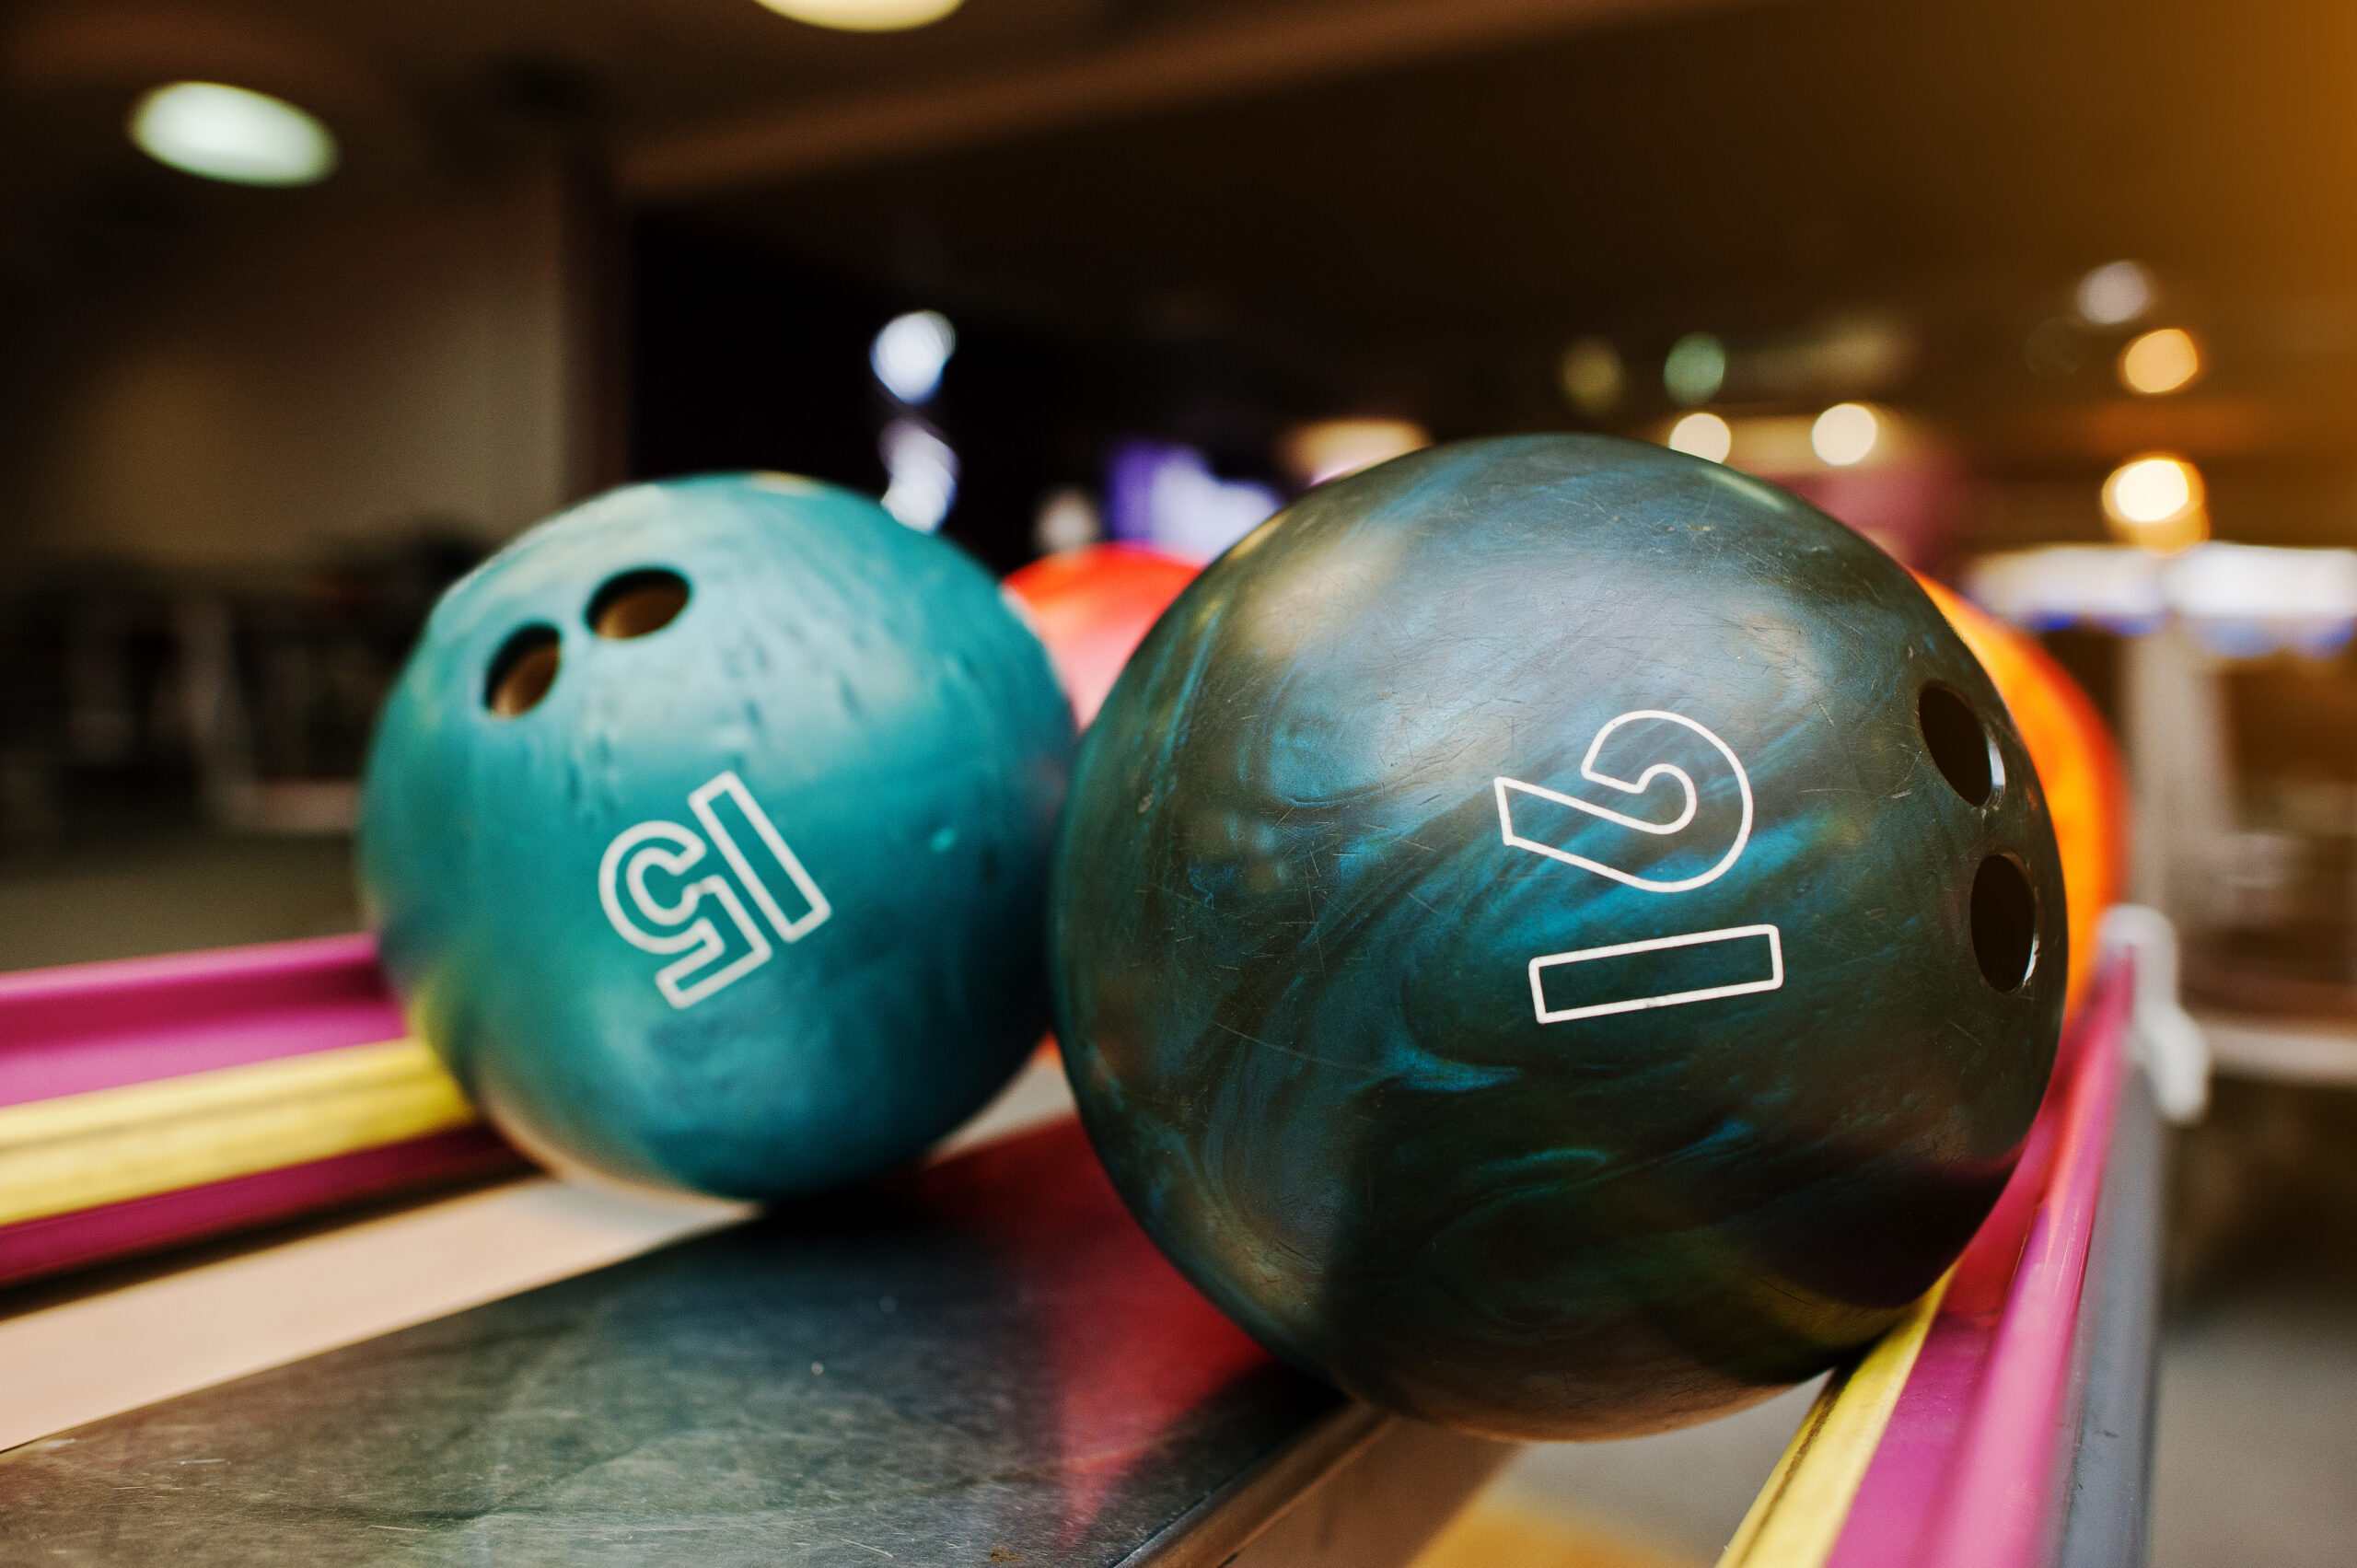 Two colored bowling balls of number 16 and 15